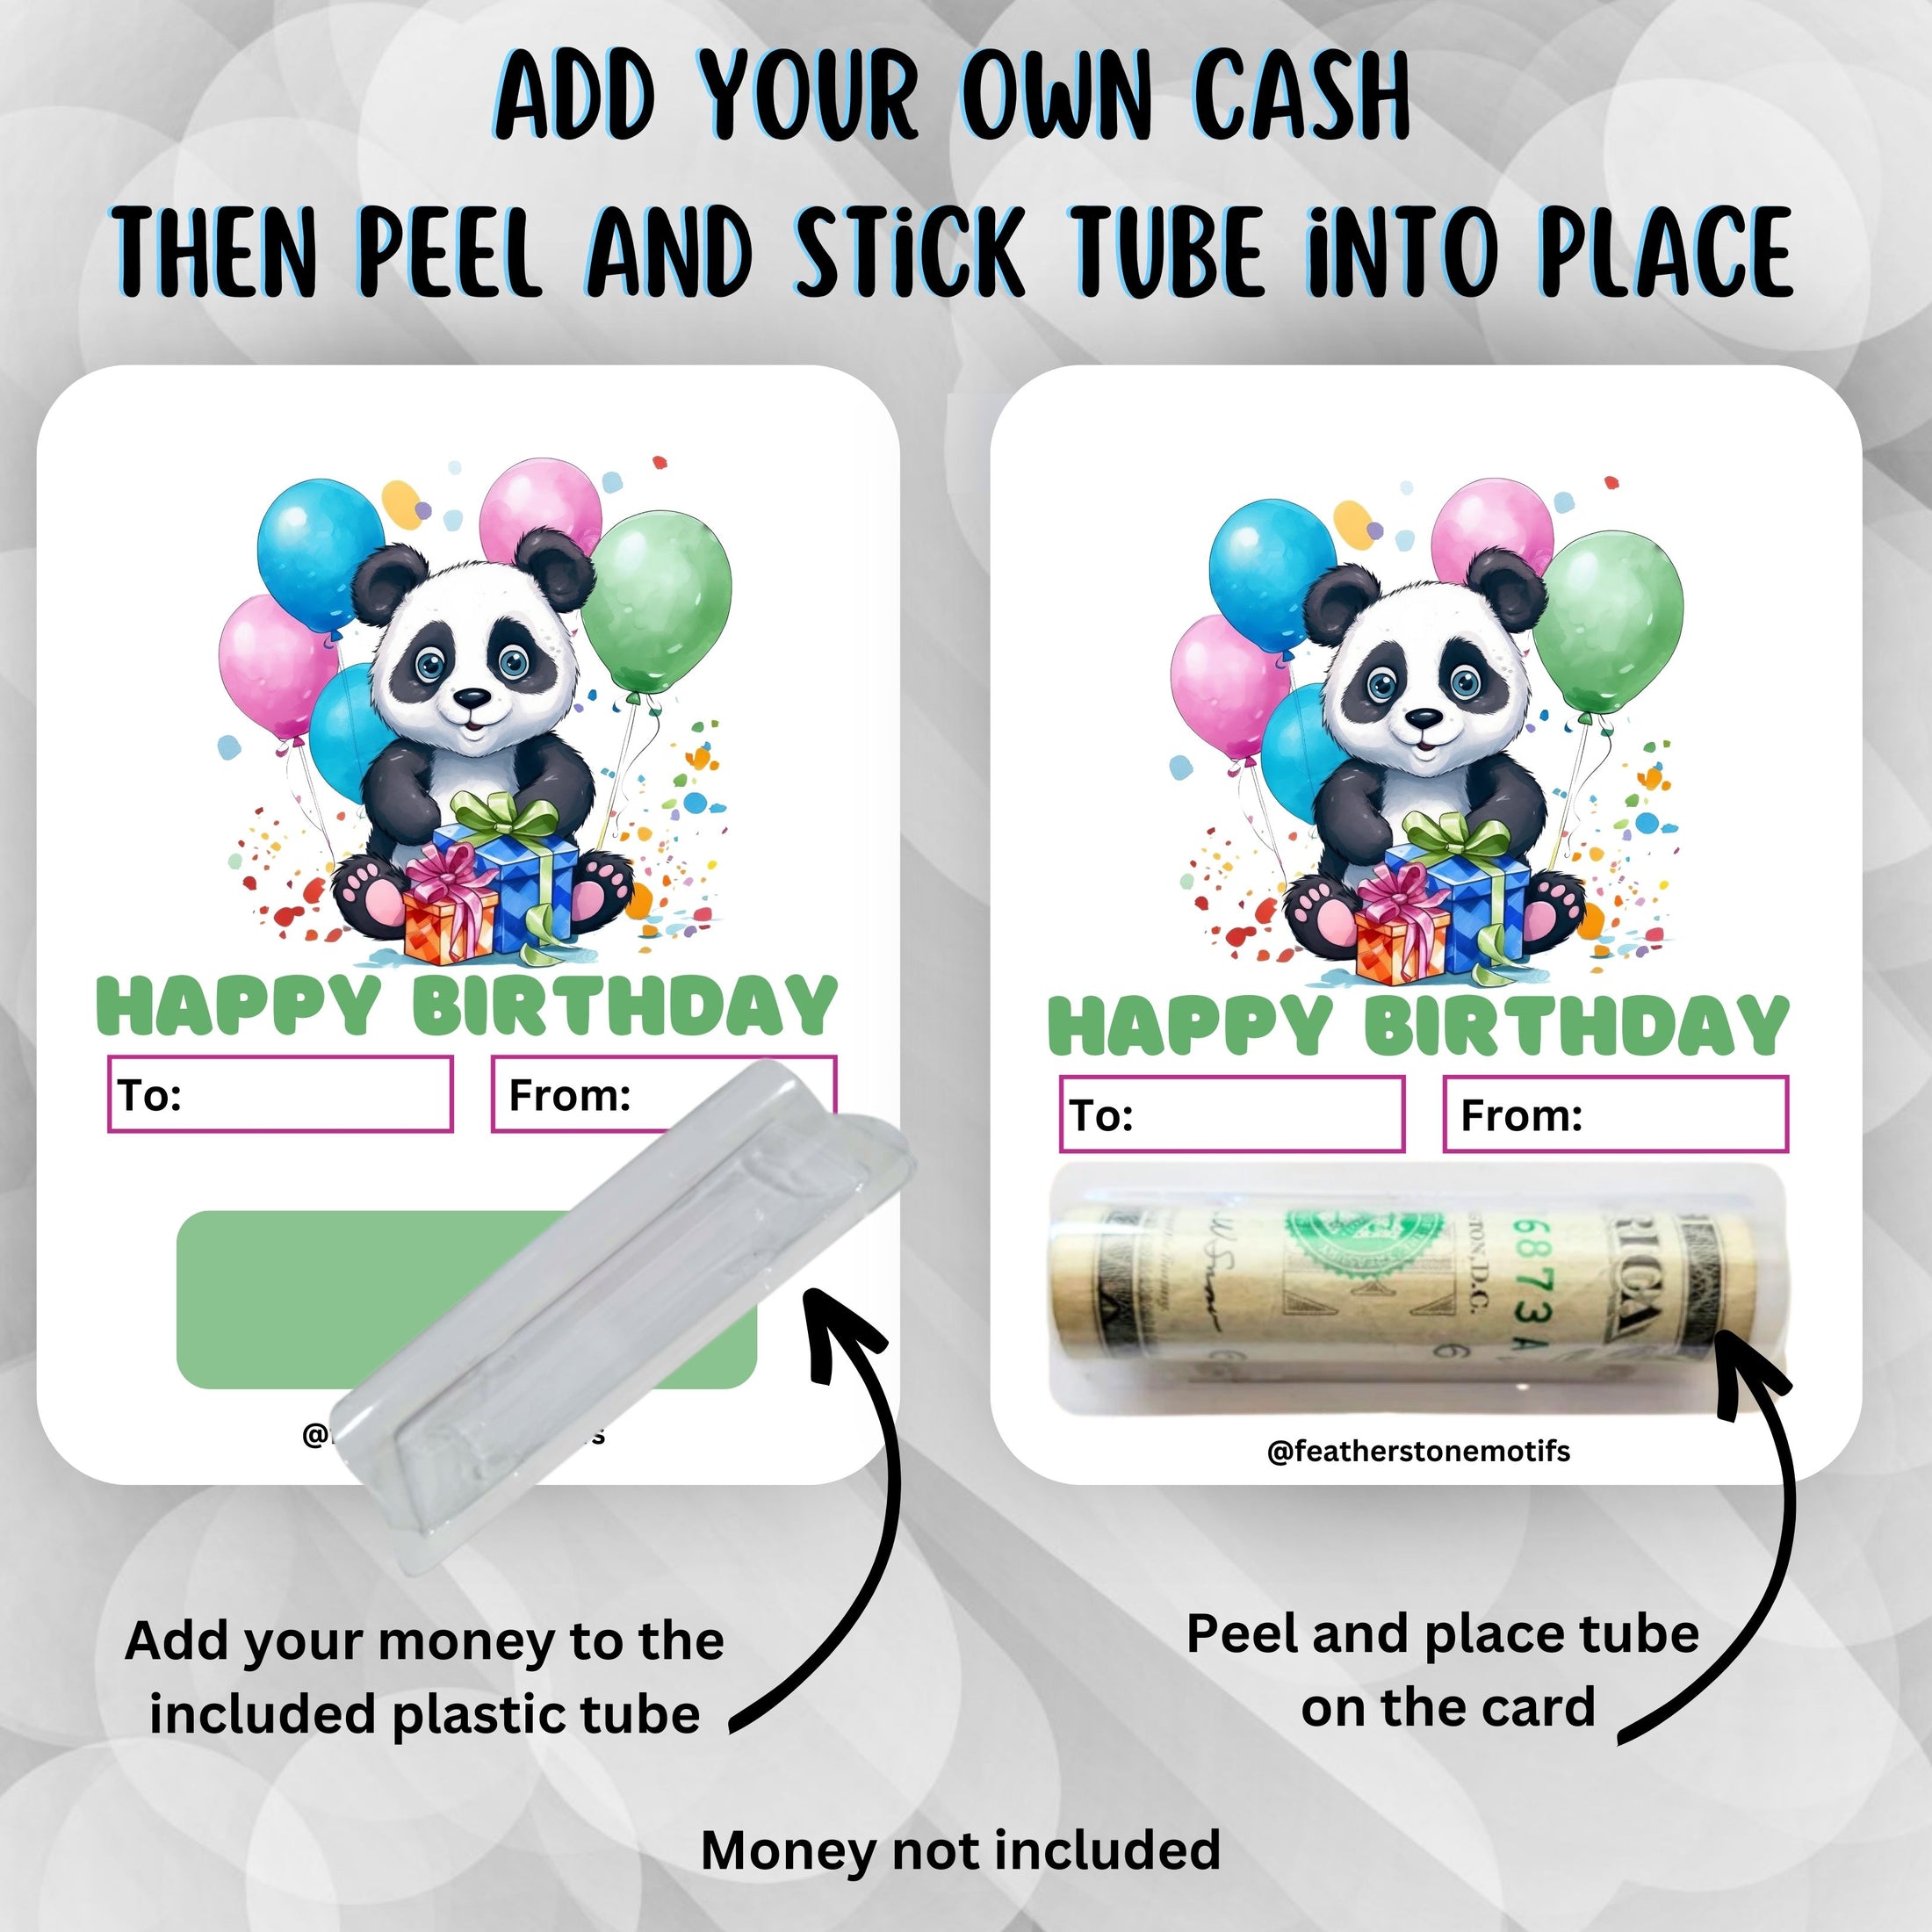 This image shows how to attach the money tube to the Panda Birthday Money Card.